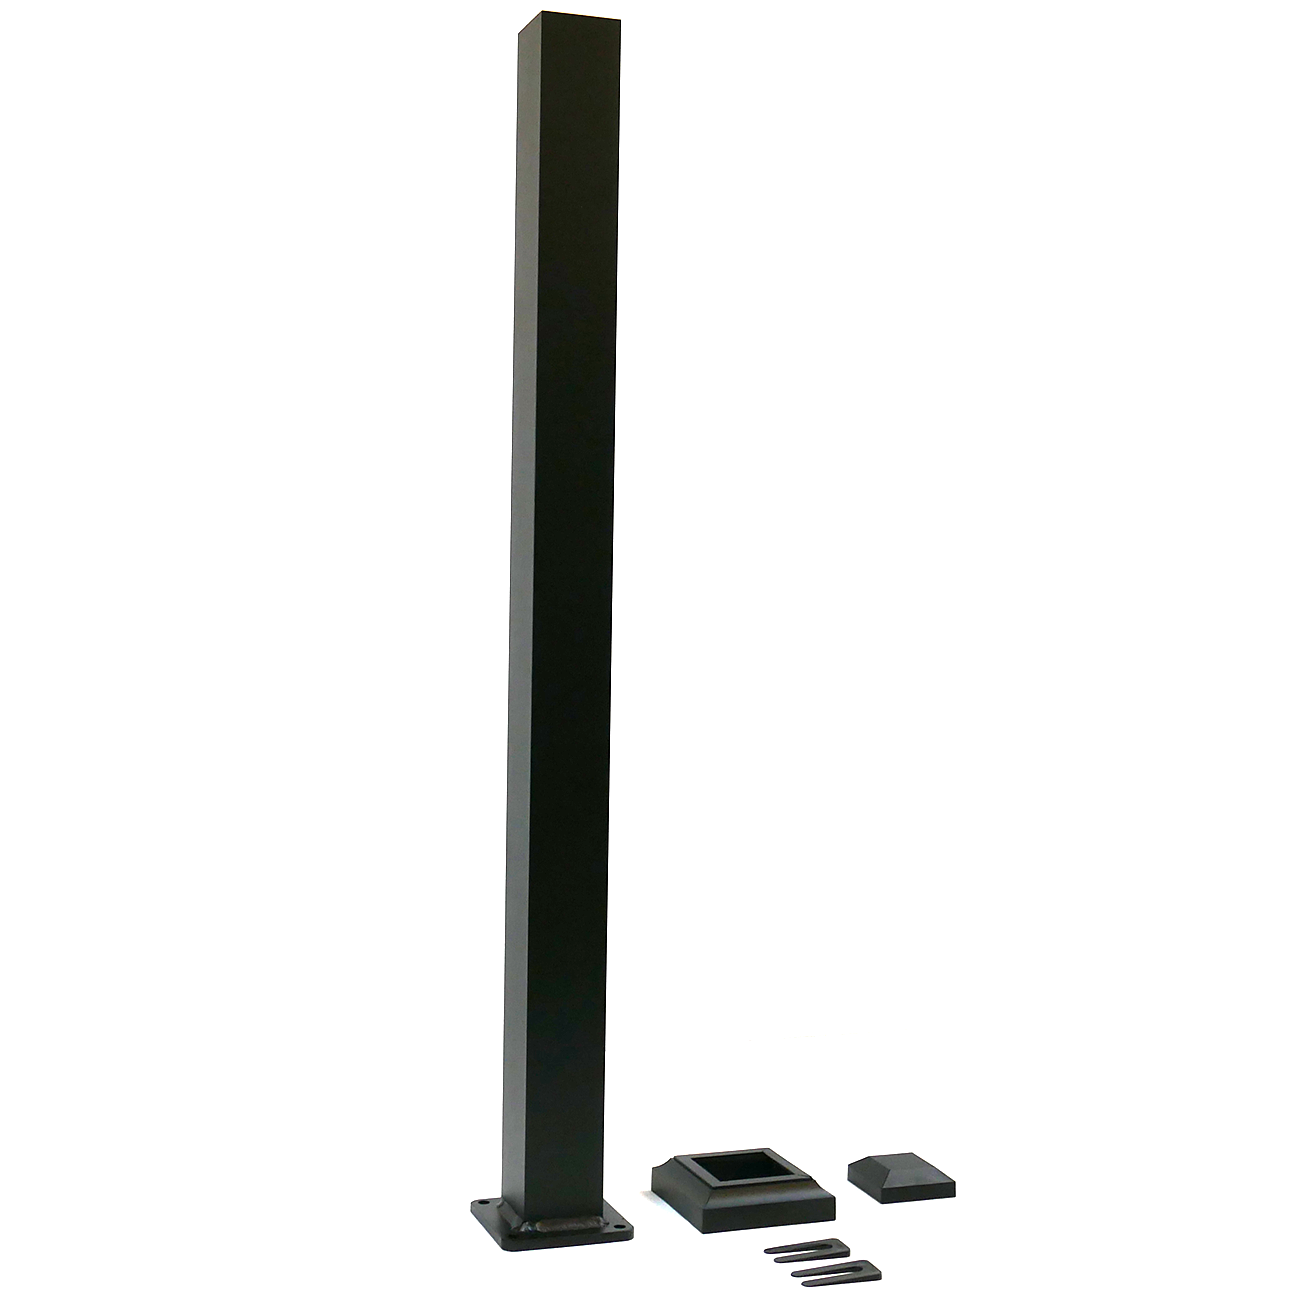 Product photo of Dekpro Textured Black 3" x 3" x 44" aluminum handrail post kit. Three inches by Forty Four Inches